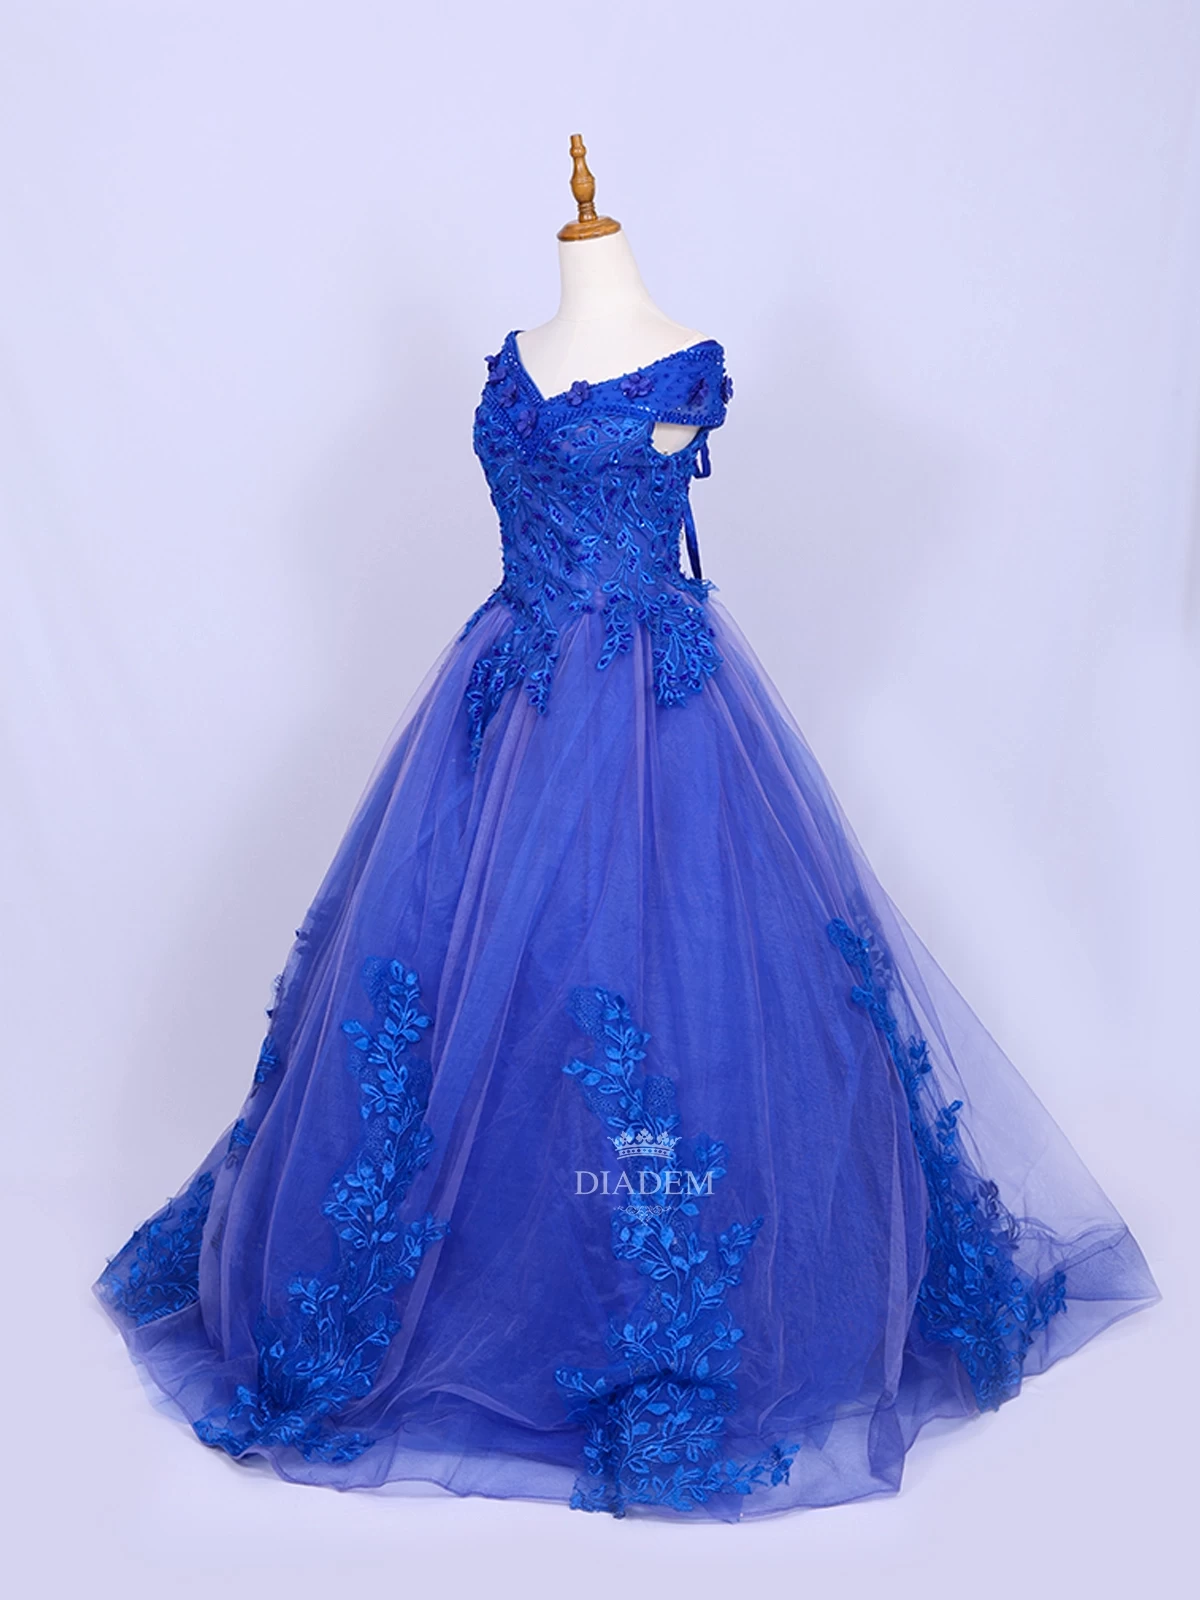 Royal Blue Net Off-shoulder Gown Adorned With Floral Laces And Sequins